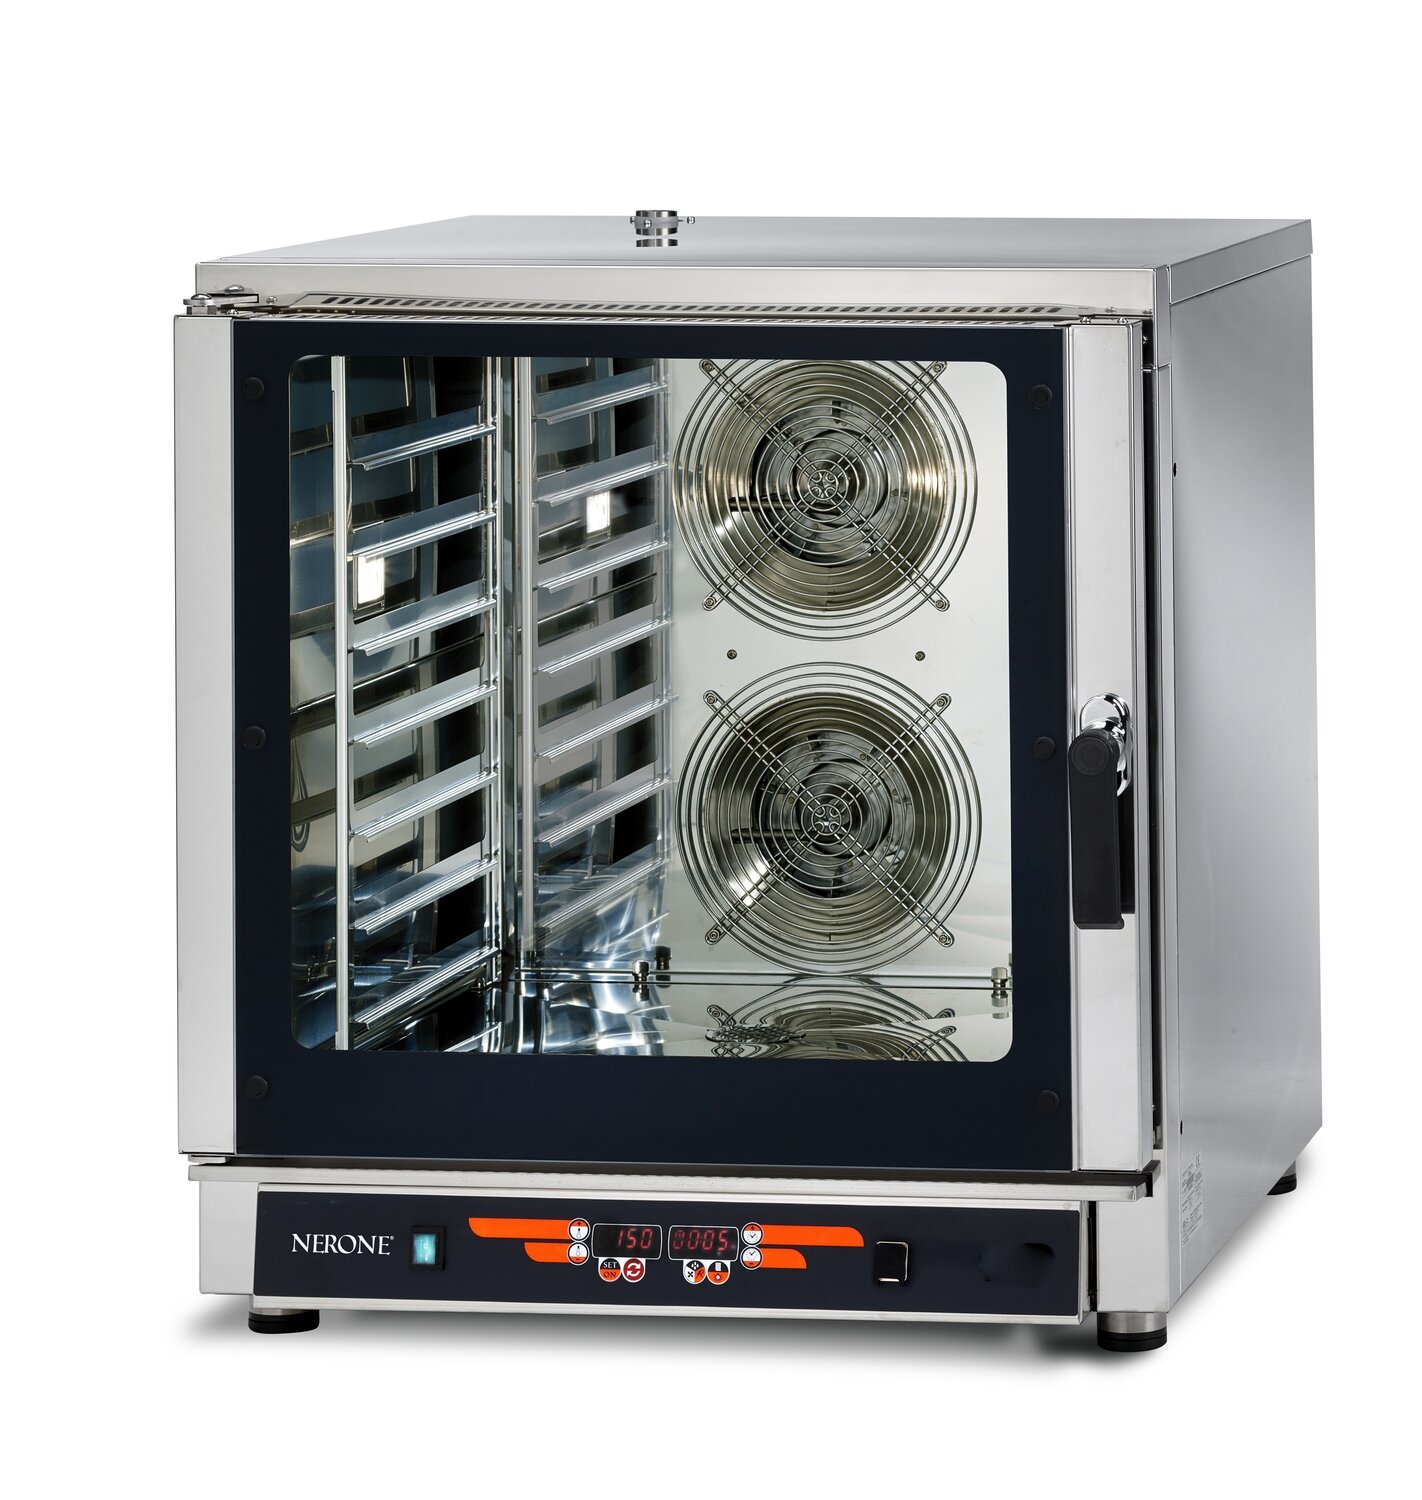 SARO Convection combination oven with humidification model DIG 7